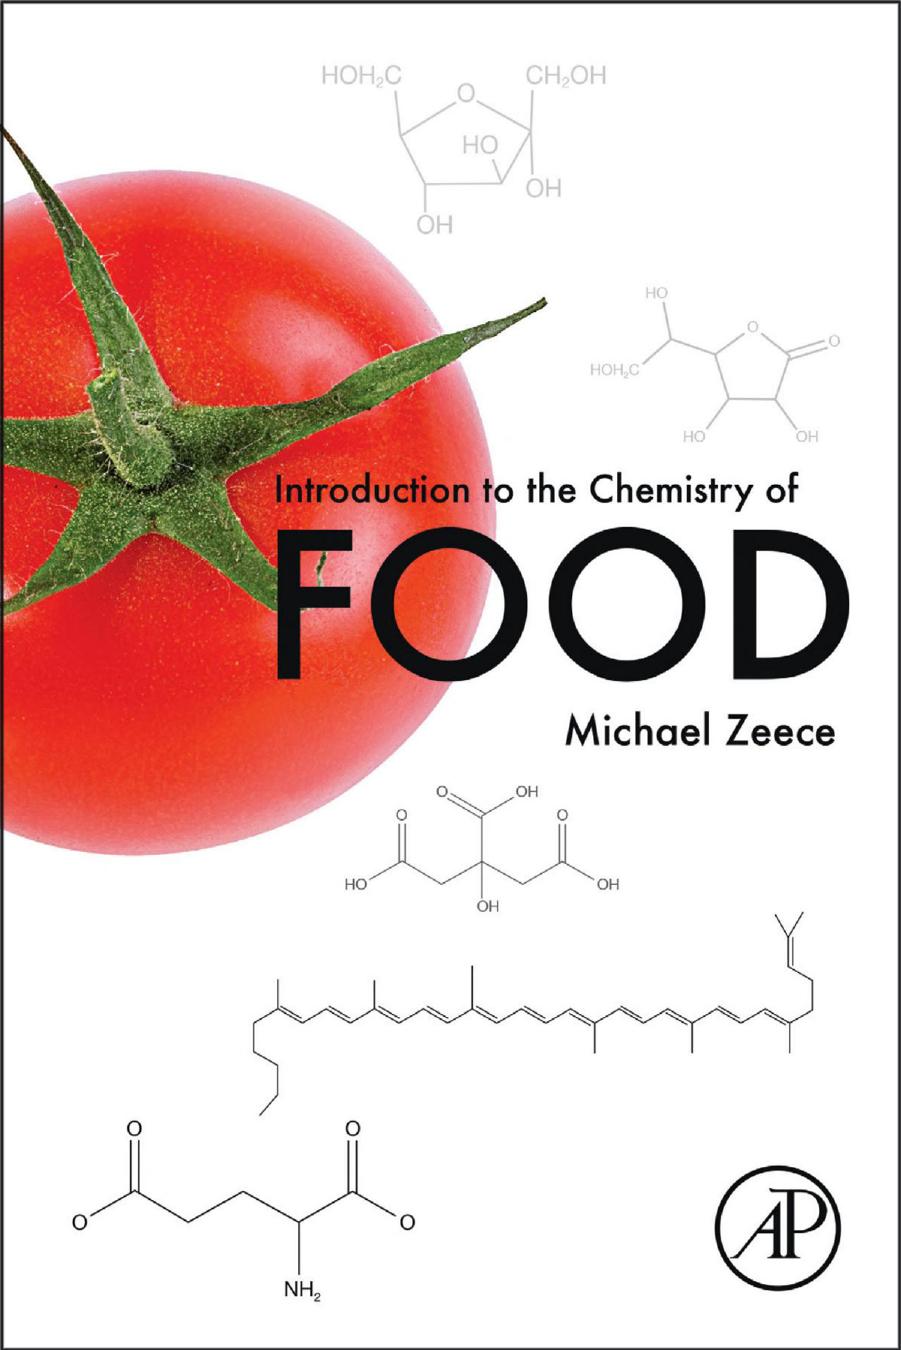 Introduction to the Chemistry of Food